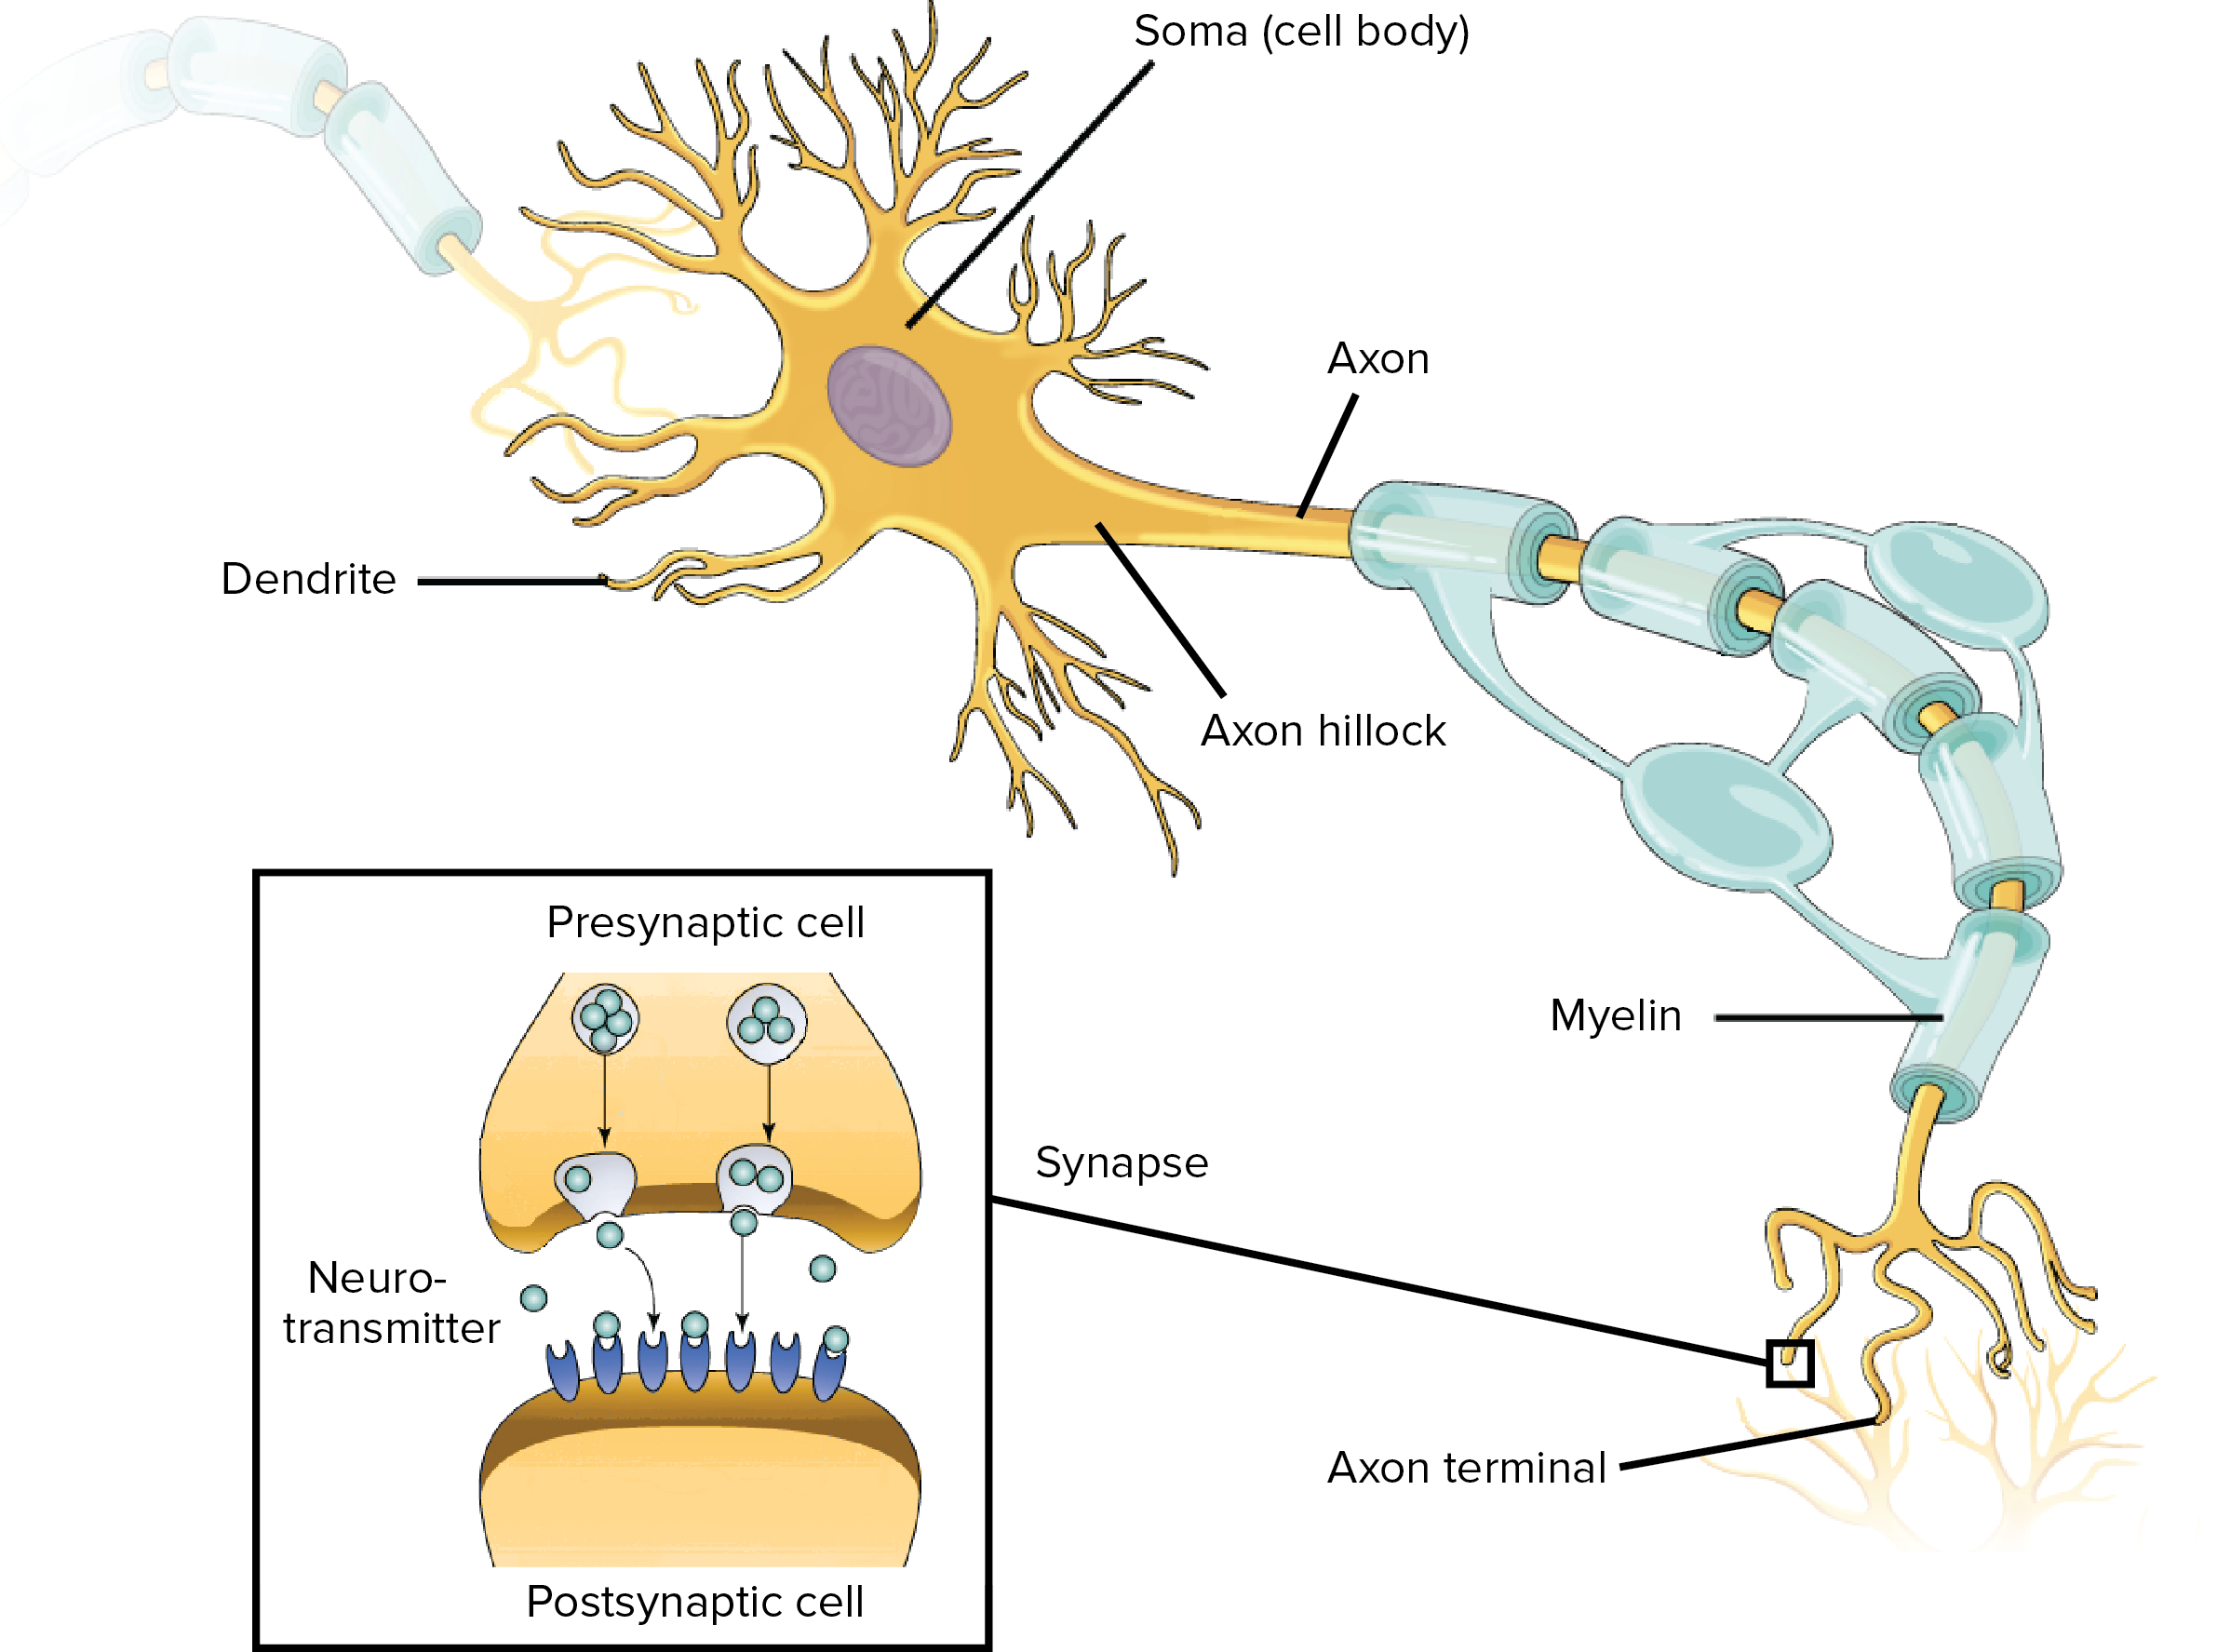 A biological neuron is the building block of the nervous system, which includes the brain. Source: <a href='https://cdn.kastatic.org/ka-perseus-images/3567fc3560de474001ec0dafb068170d30b0c751.png' target='_blank'>Khan Academy</a>.